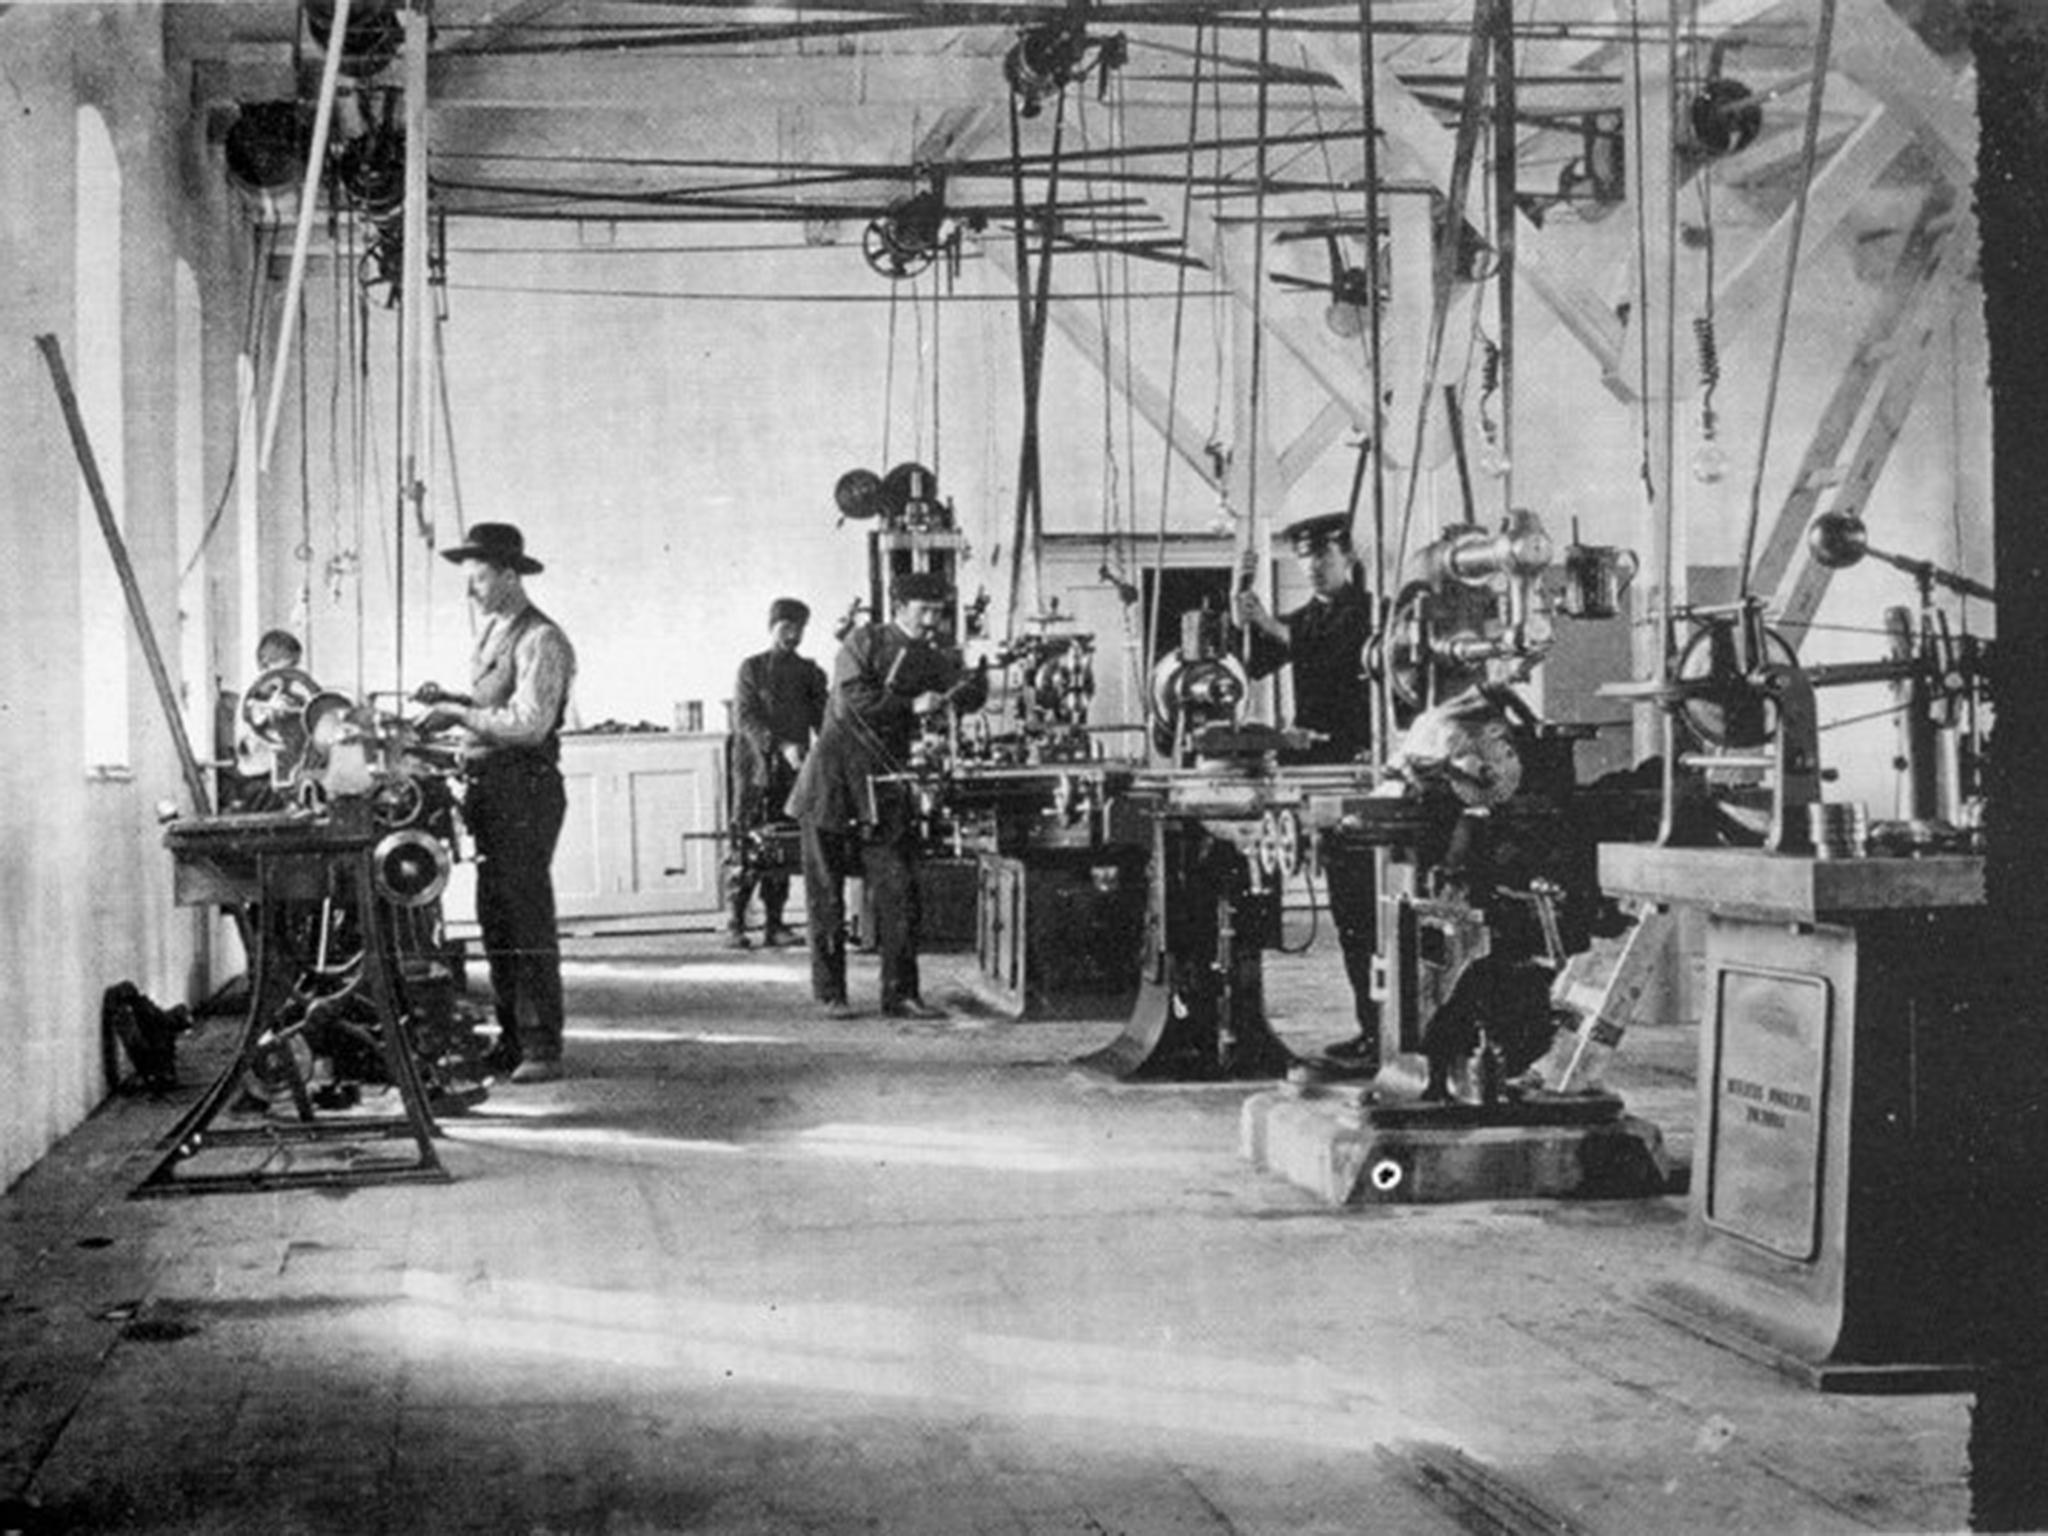 The Zastava Arms workshop in 1910 – it has a long history of weapons production